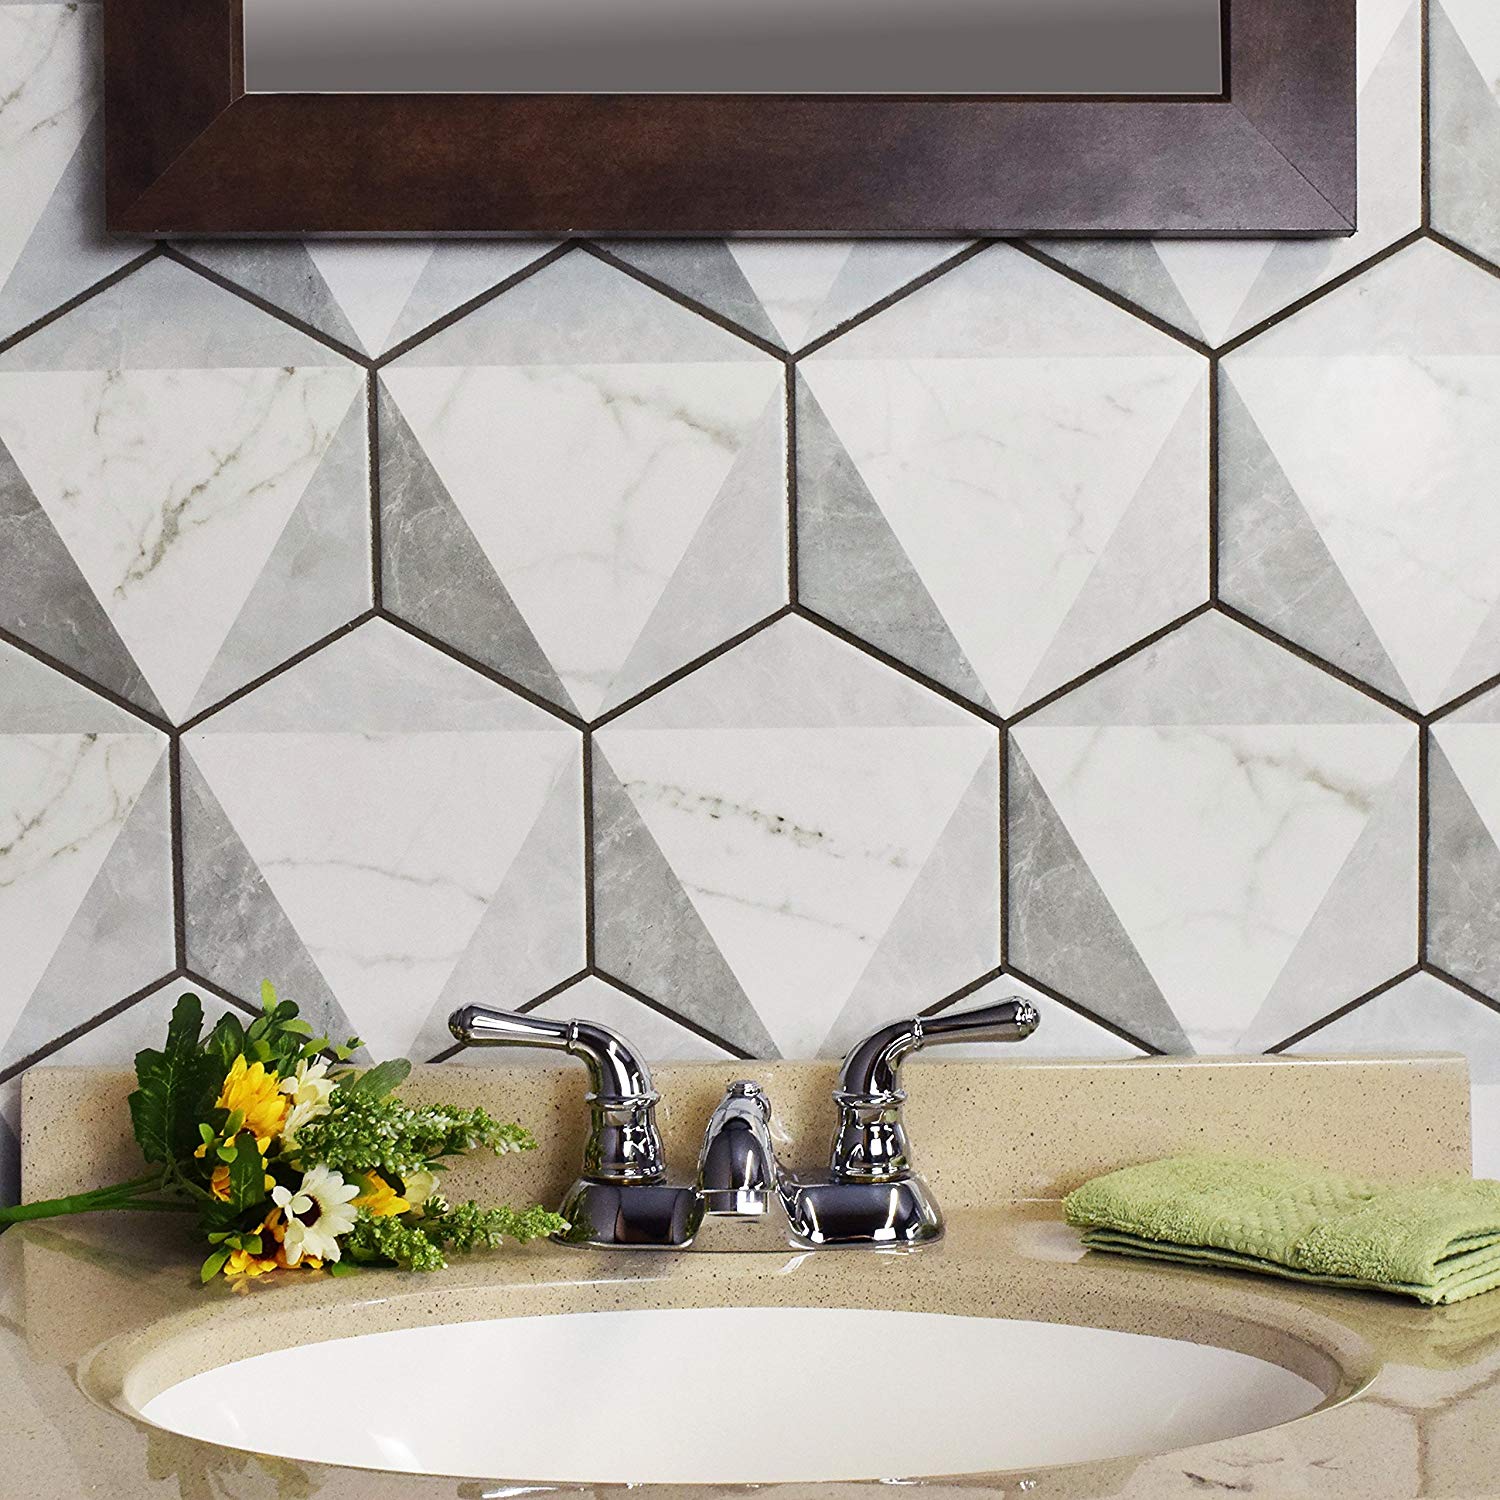 Shopping Guide: 10 Patterned Floor Tiles With Subtle Geometric Designs /// By Design Fixation #decor #tiles #bathroom